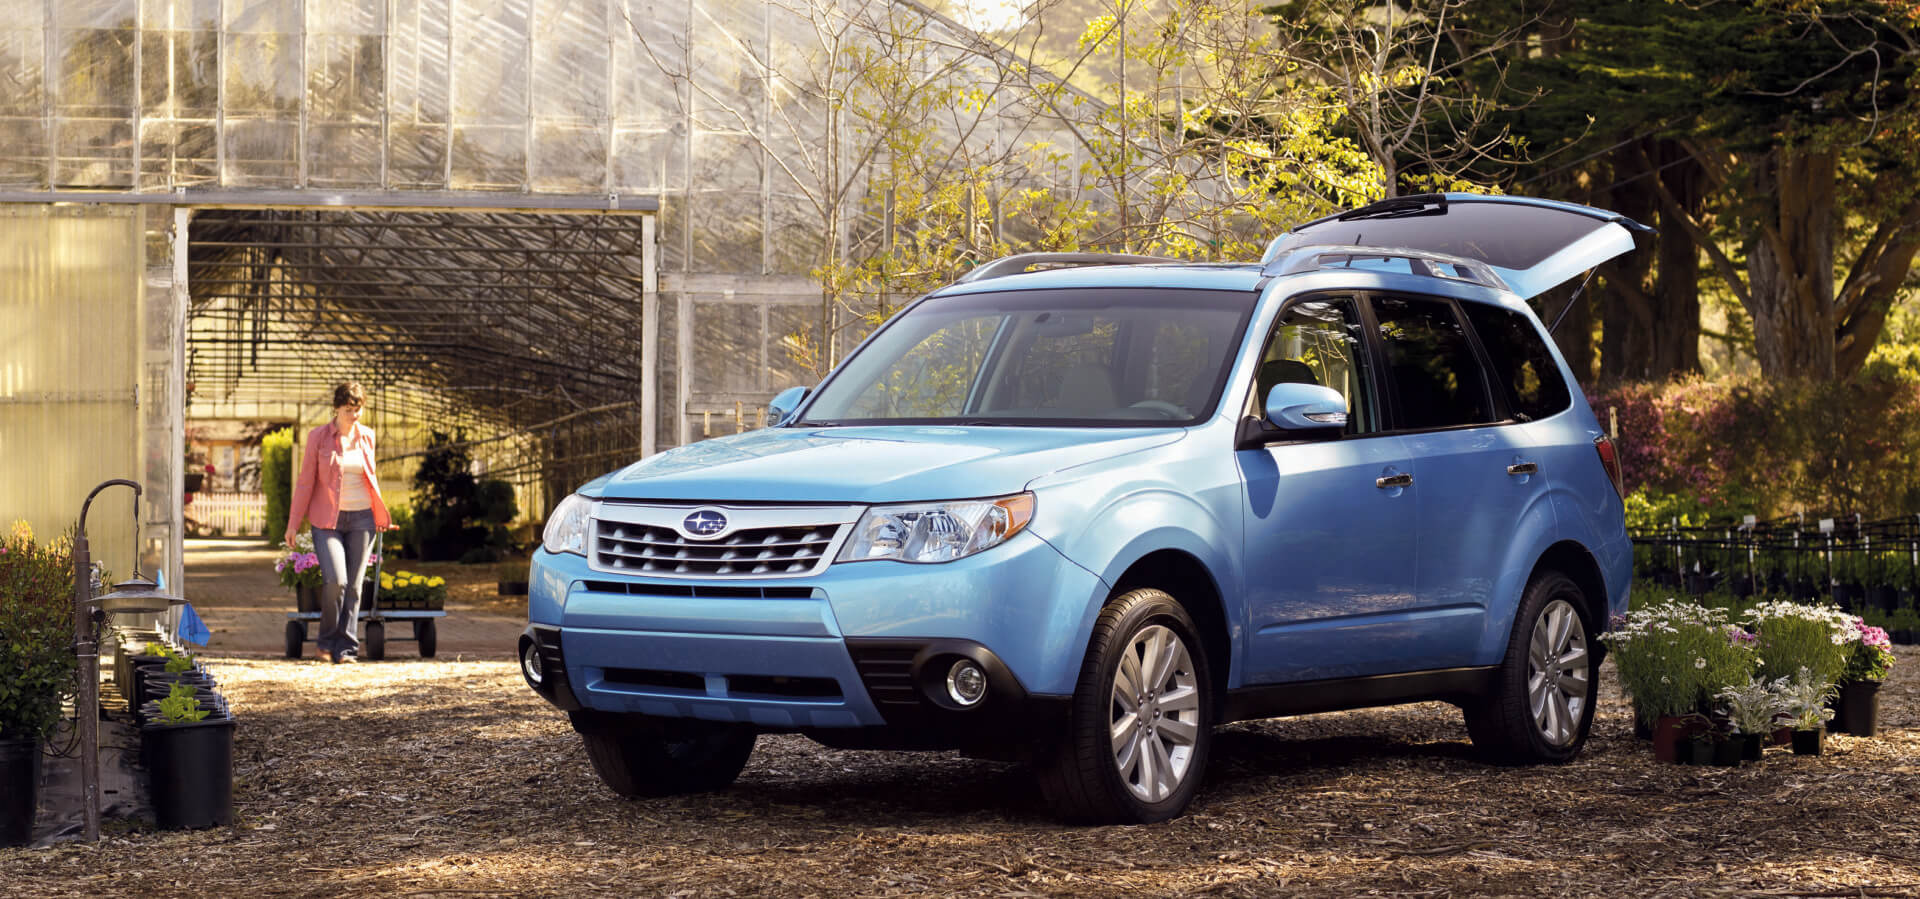 2011 Subaru Forester Review: A Compact SUV Focused on Comfort and Reliability